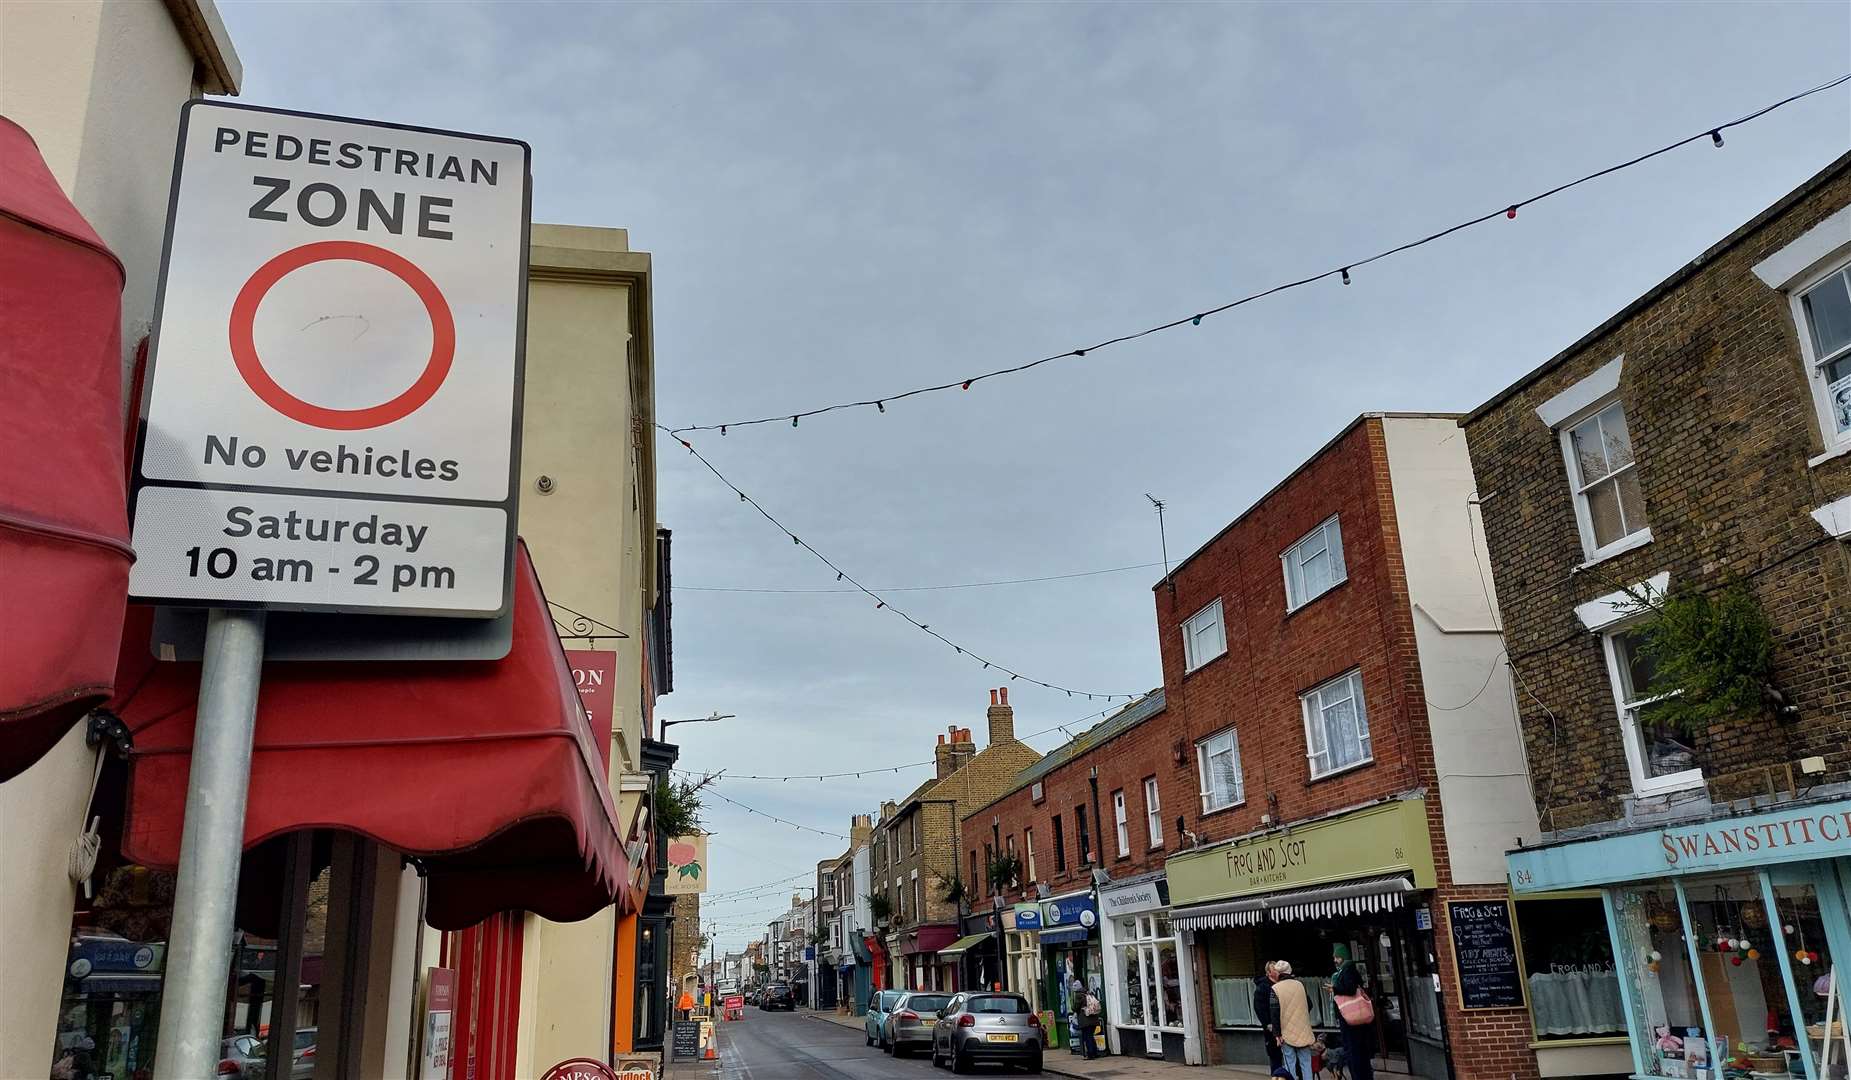 The northern part of Deal high street is already closed to traffic between 10am and 2pm on Saturdays